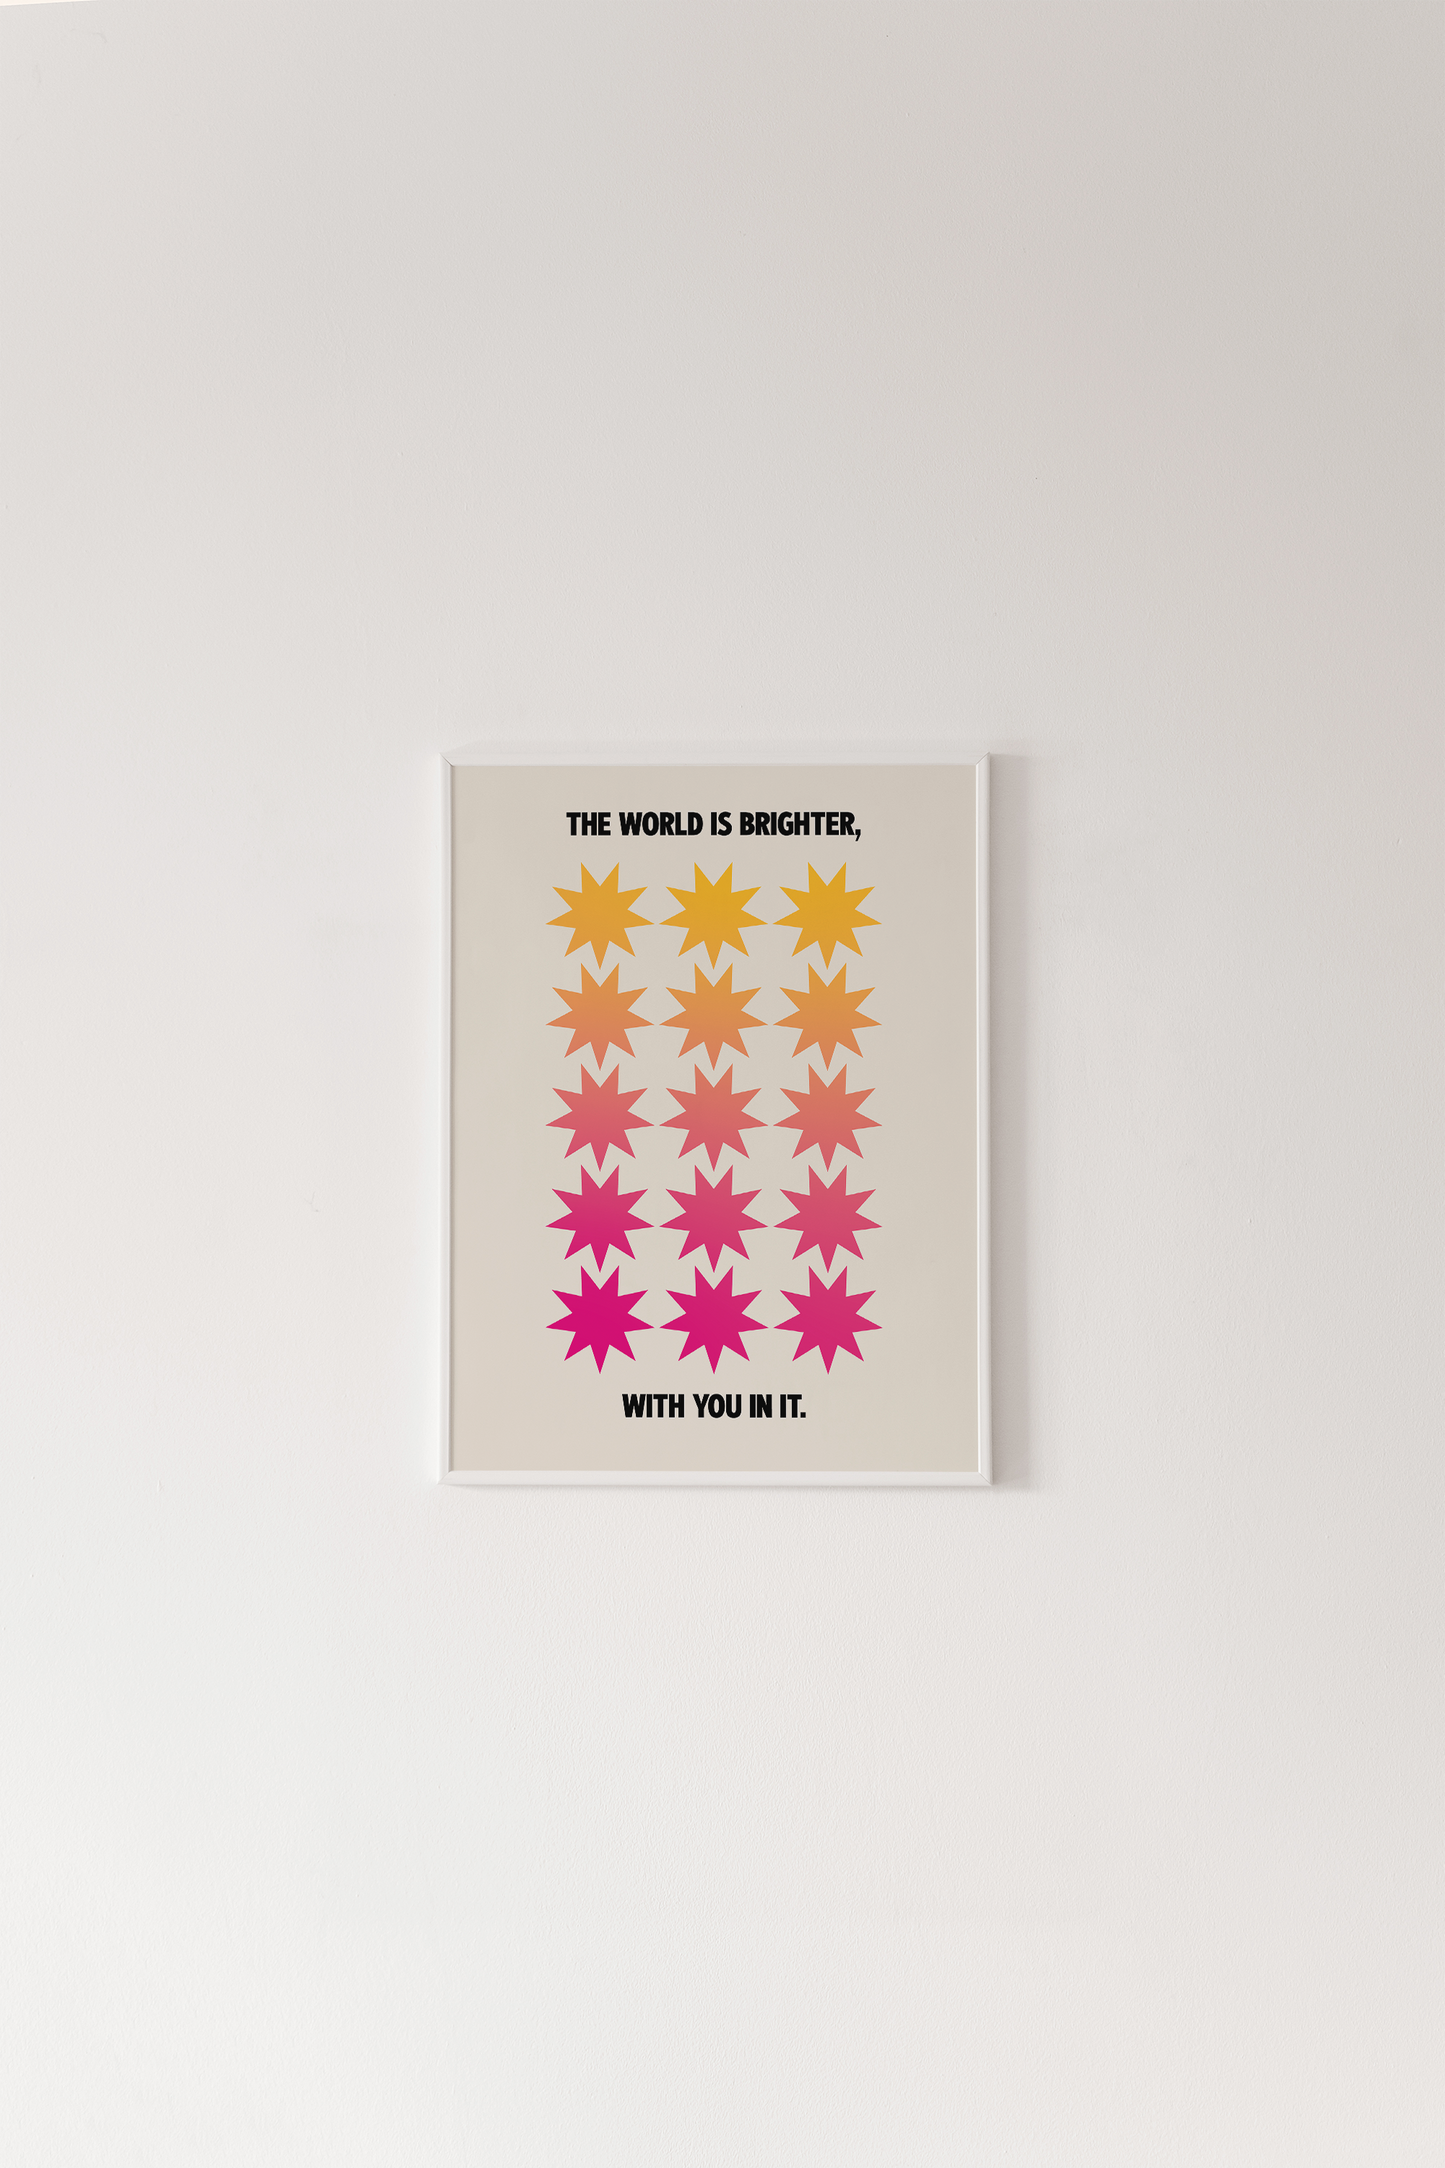 The World is Brighter Print